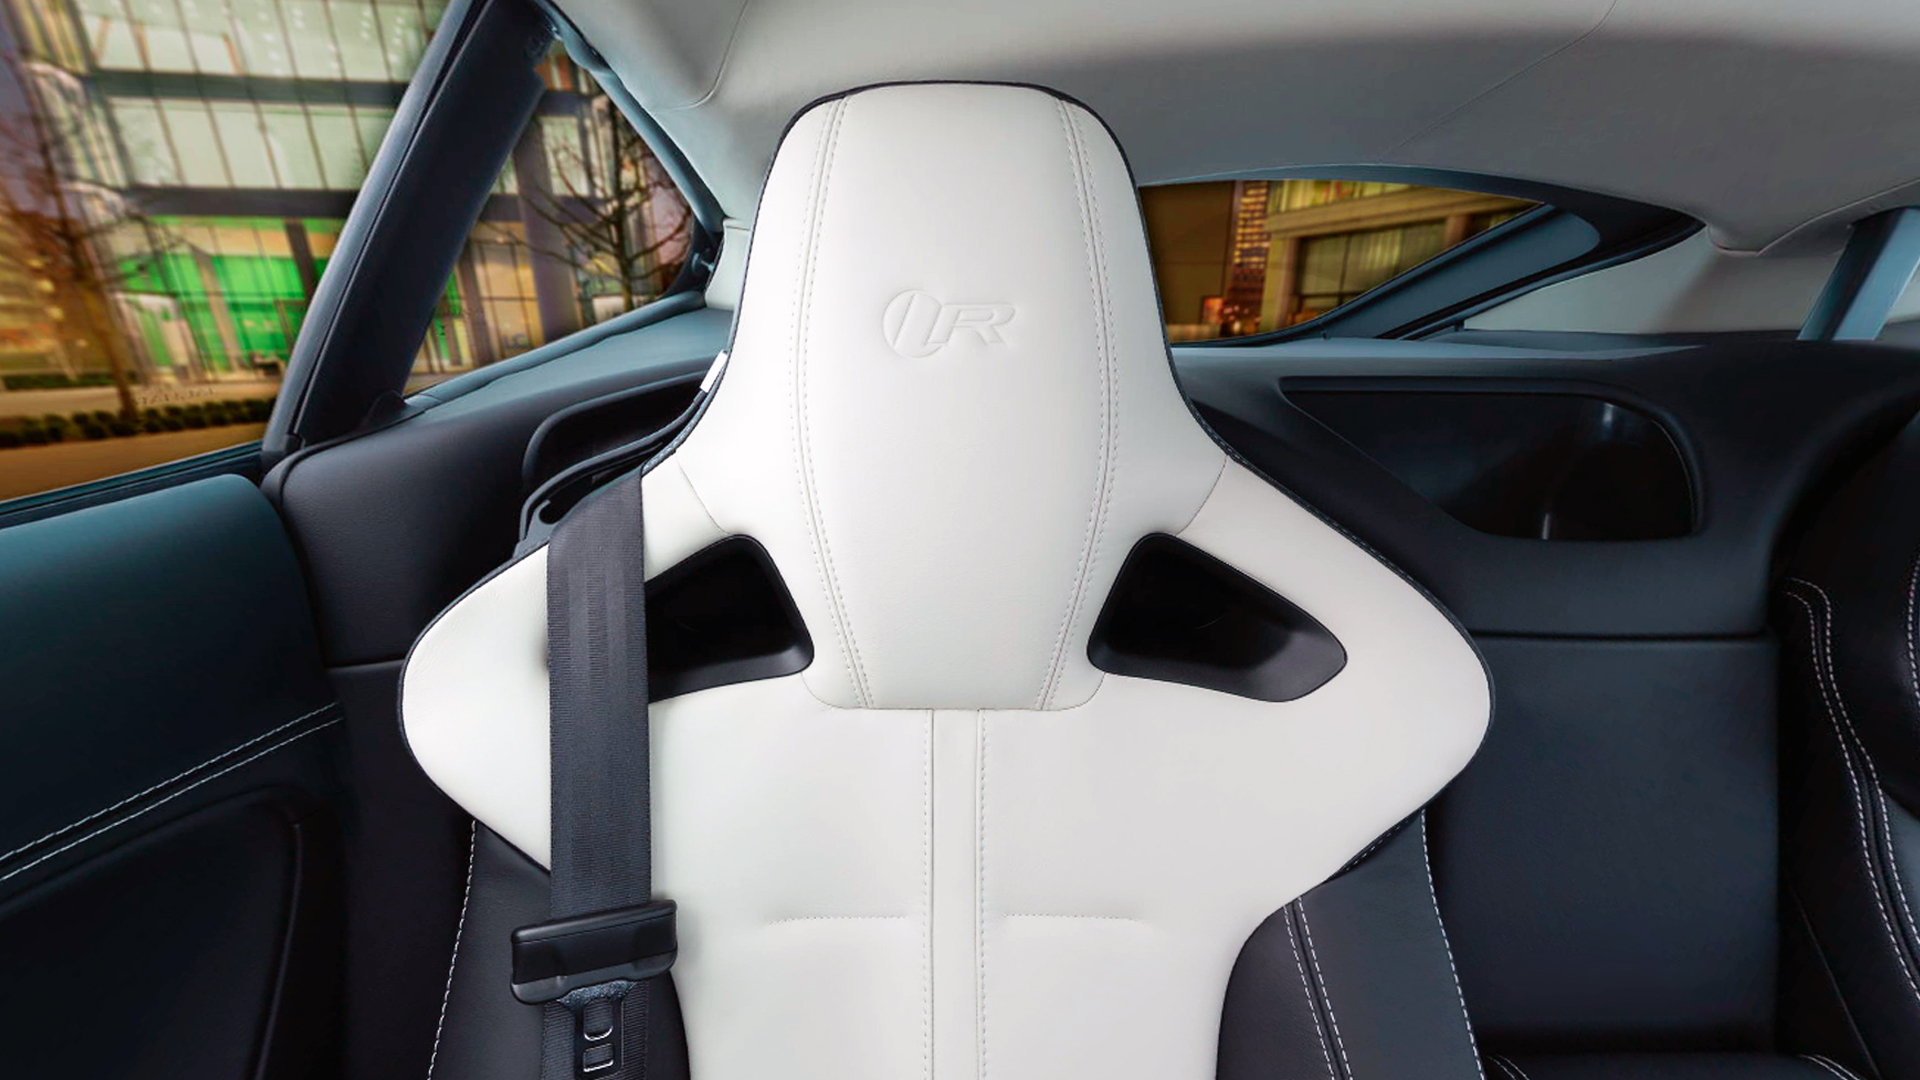 Jaguar F-TYPE driver's seat. Virtual background to use on Zoom, Microsoft Teams, Skype, Google Meet, WebEx or any other compatible app.